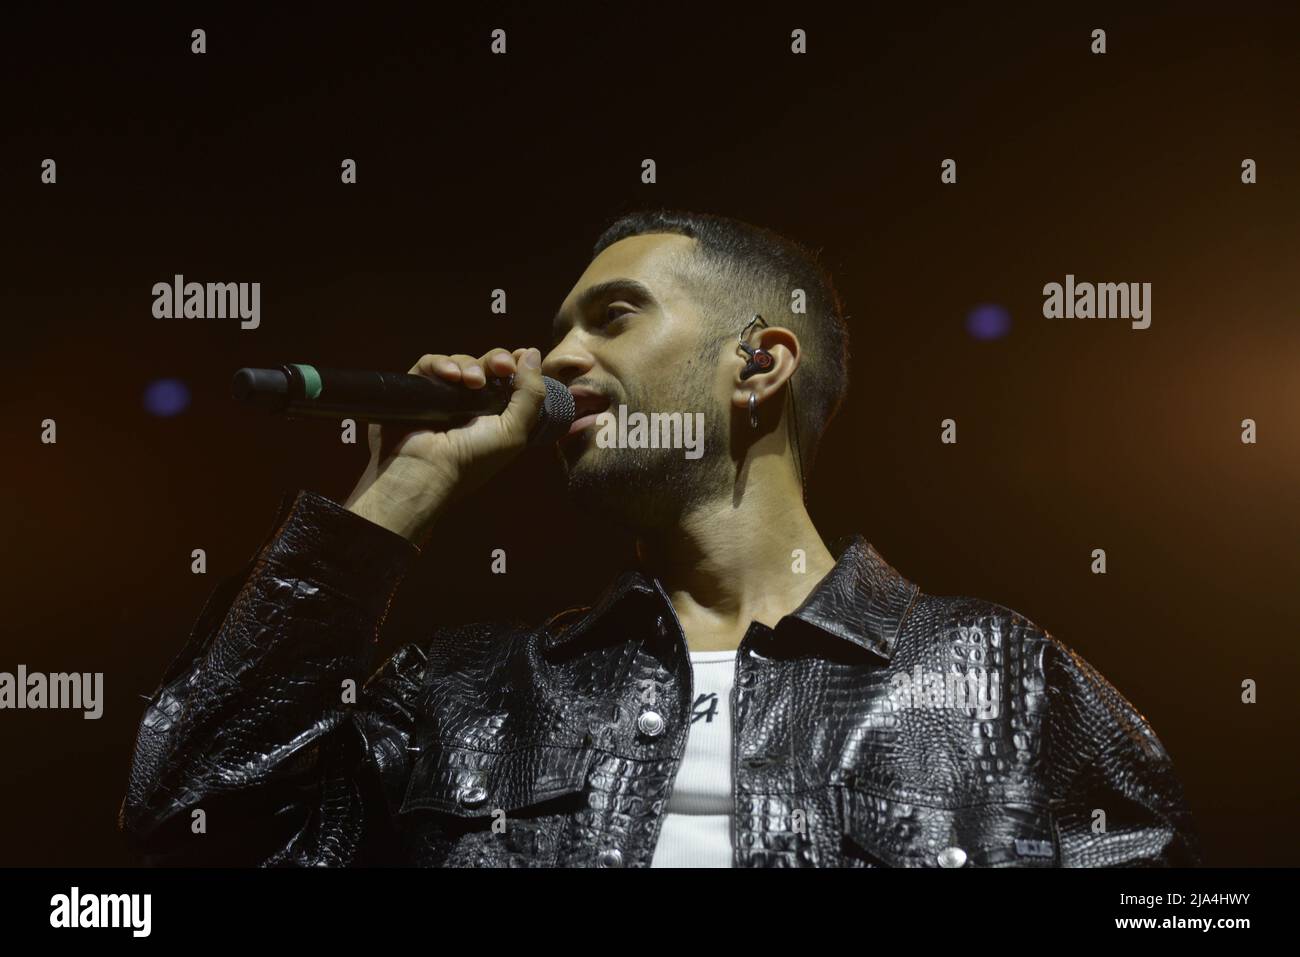 Padua, Italy, 25/05/2022, Alessandro Mahmoud, known professionally as Mahmood, is an Italian singer-songwriter. He rose to prominence after competing on the sixth season of the Italian version of The X Factor. He has won the Sanremo Music Festival twice, in 2019 with the song 'Soldi' and in 2022 alongside Blanco with the song 'Brividi'. His Sanremo victories allowed him to represent Italy at the Eurovision Song Contest in those respective years, finishing in second place in 2019 and in sixth place in 2022 as the host entrant.[1][2][3] Mahmood has released two studio albums, Gioventù bruciata a Stock Photo